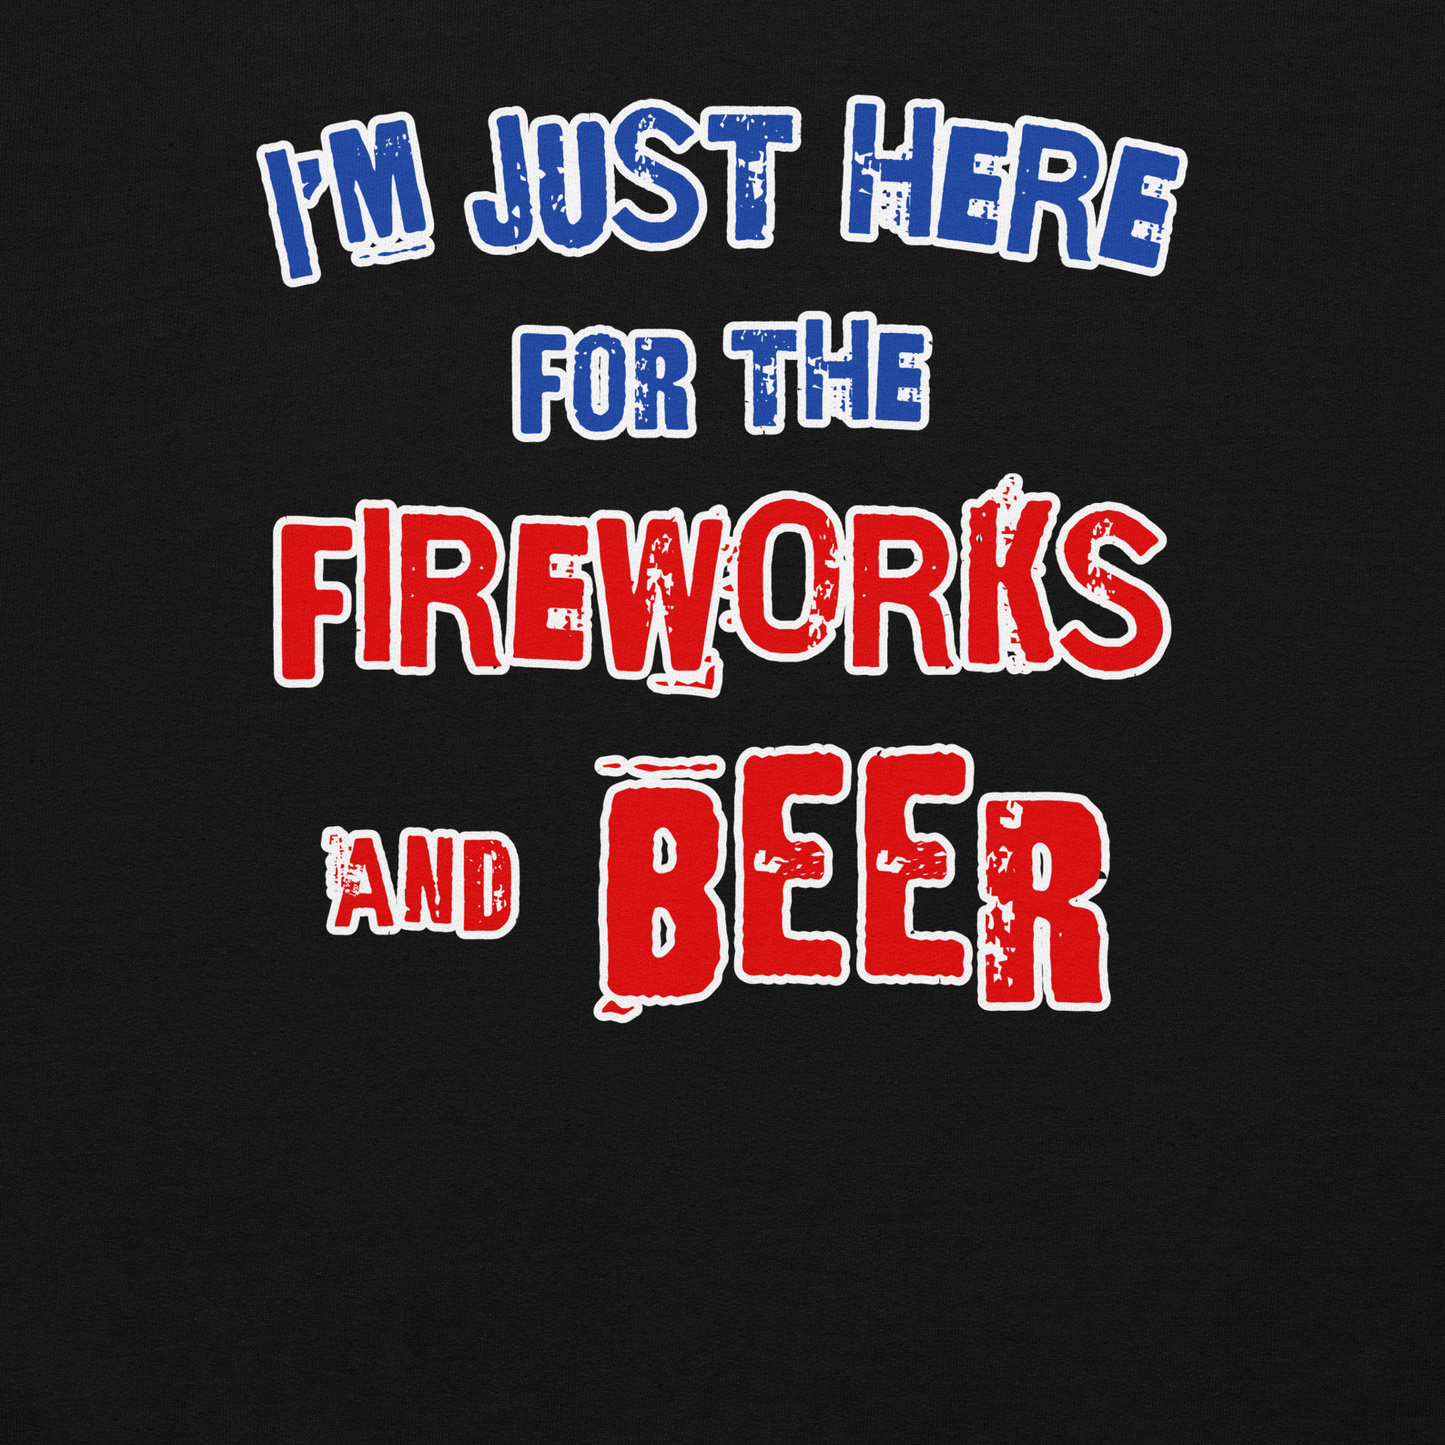 I'm Just Here for the Fireworks and Beer  Hoodie